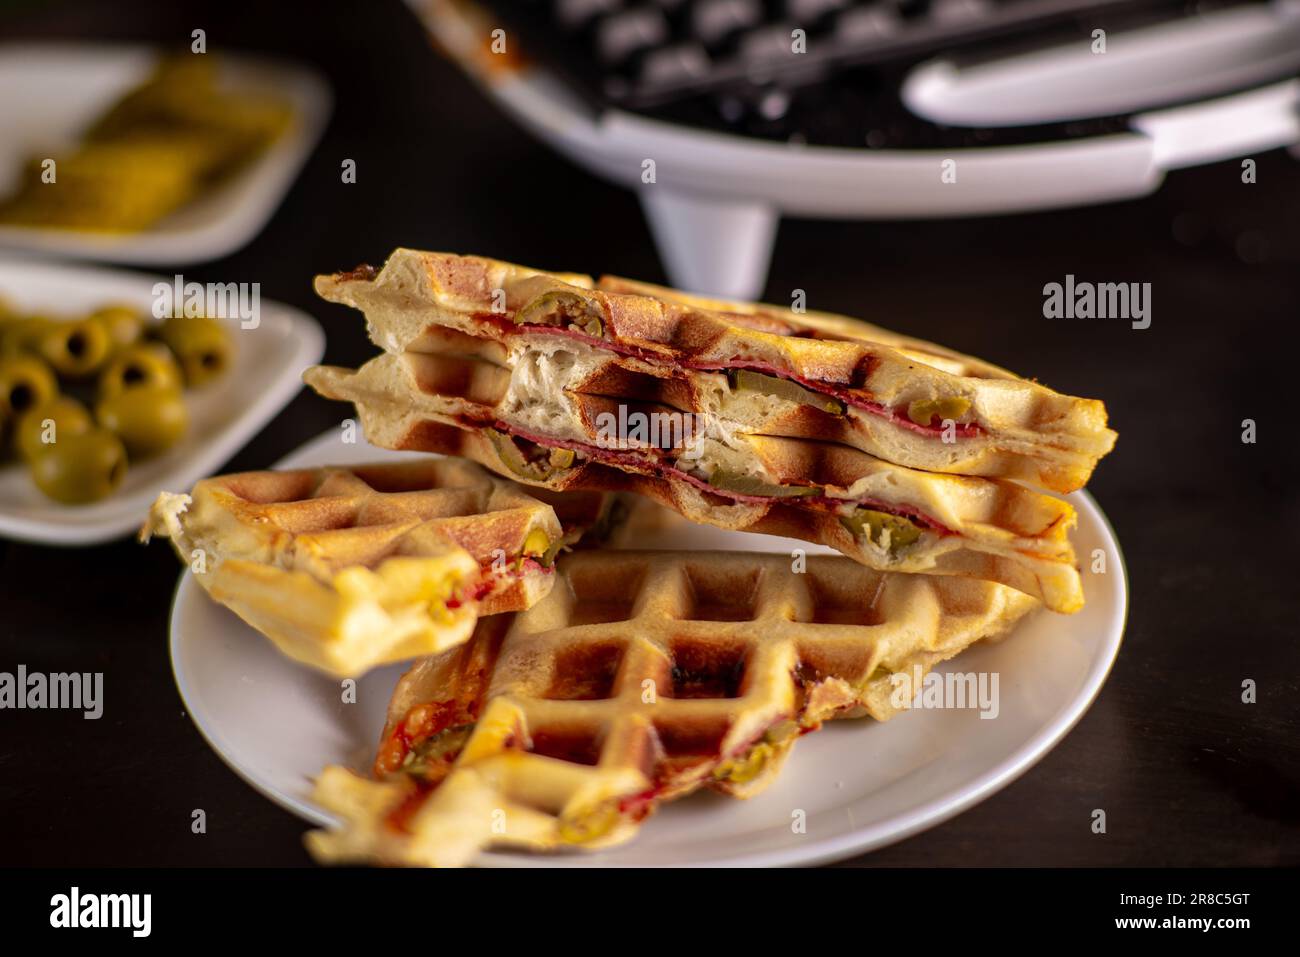 https://c8.alamy.com/comp/2R8C5GT/pizza-waffles-piffle-waffles-stuffed-with-sausage-cheese-tomatoes-on-a-plate-2R8C5GT.jpg